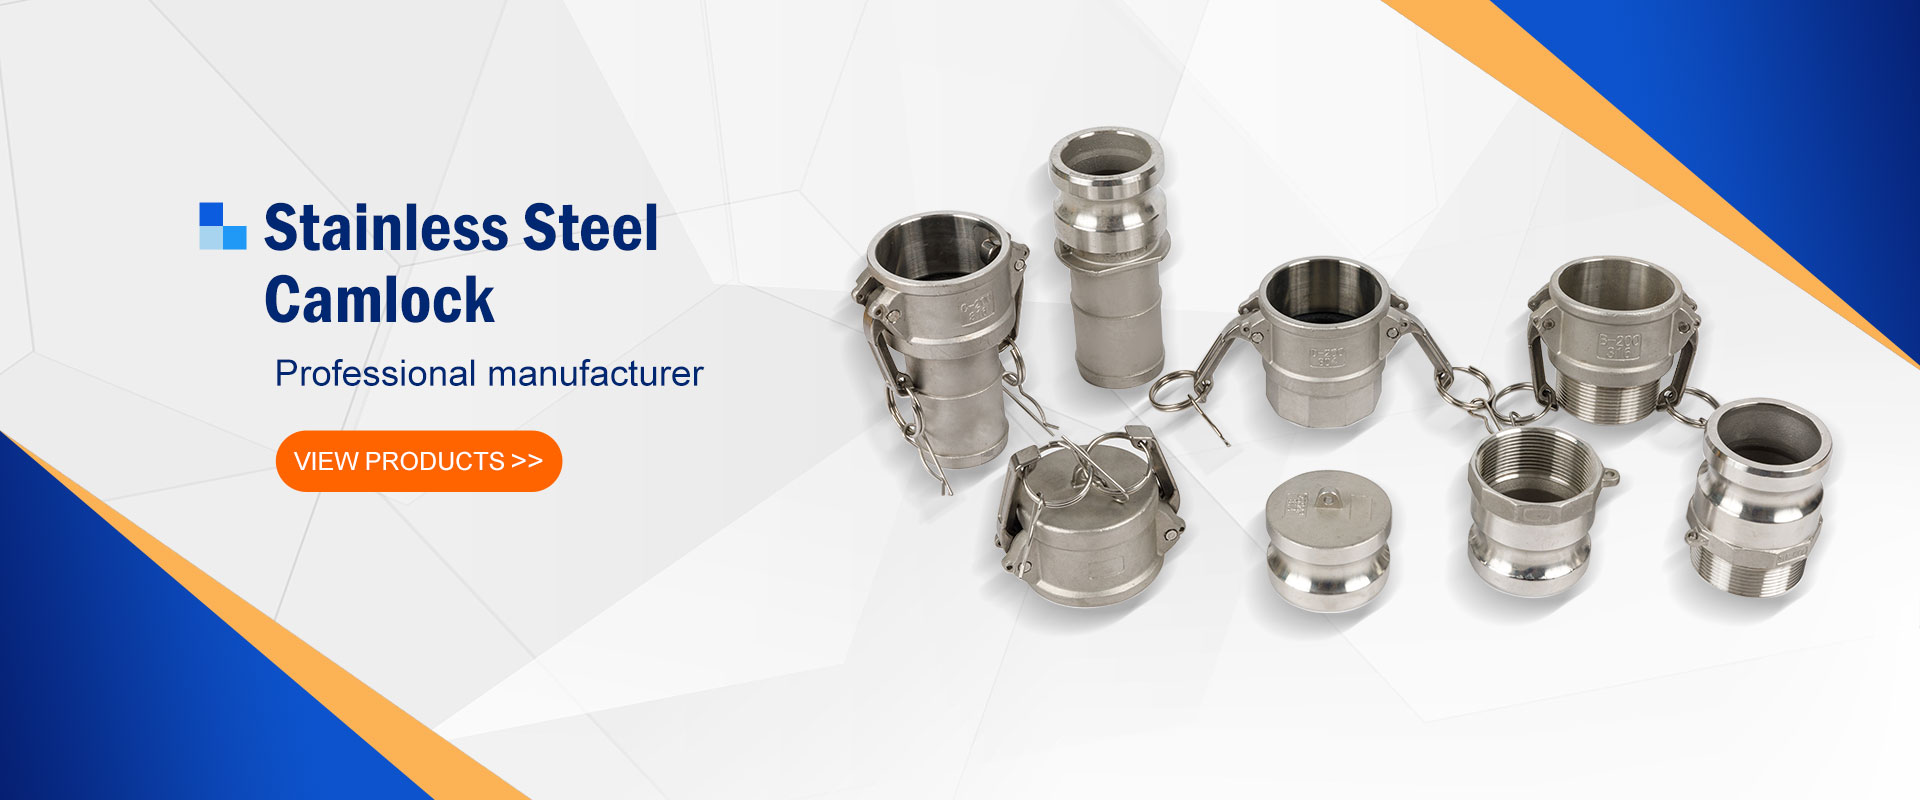 Stainless Steel Camlock Coupling Manufacturers